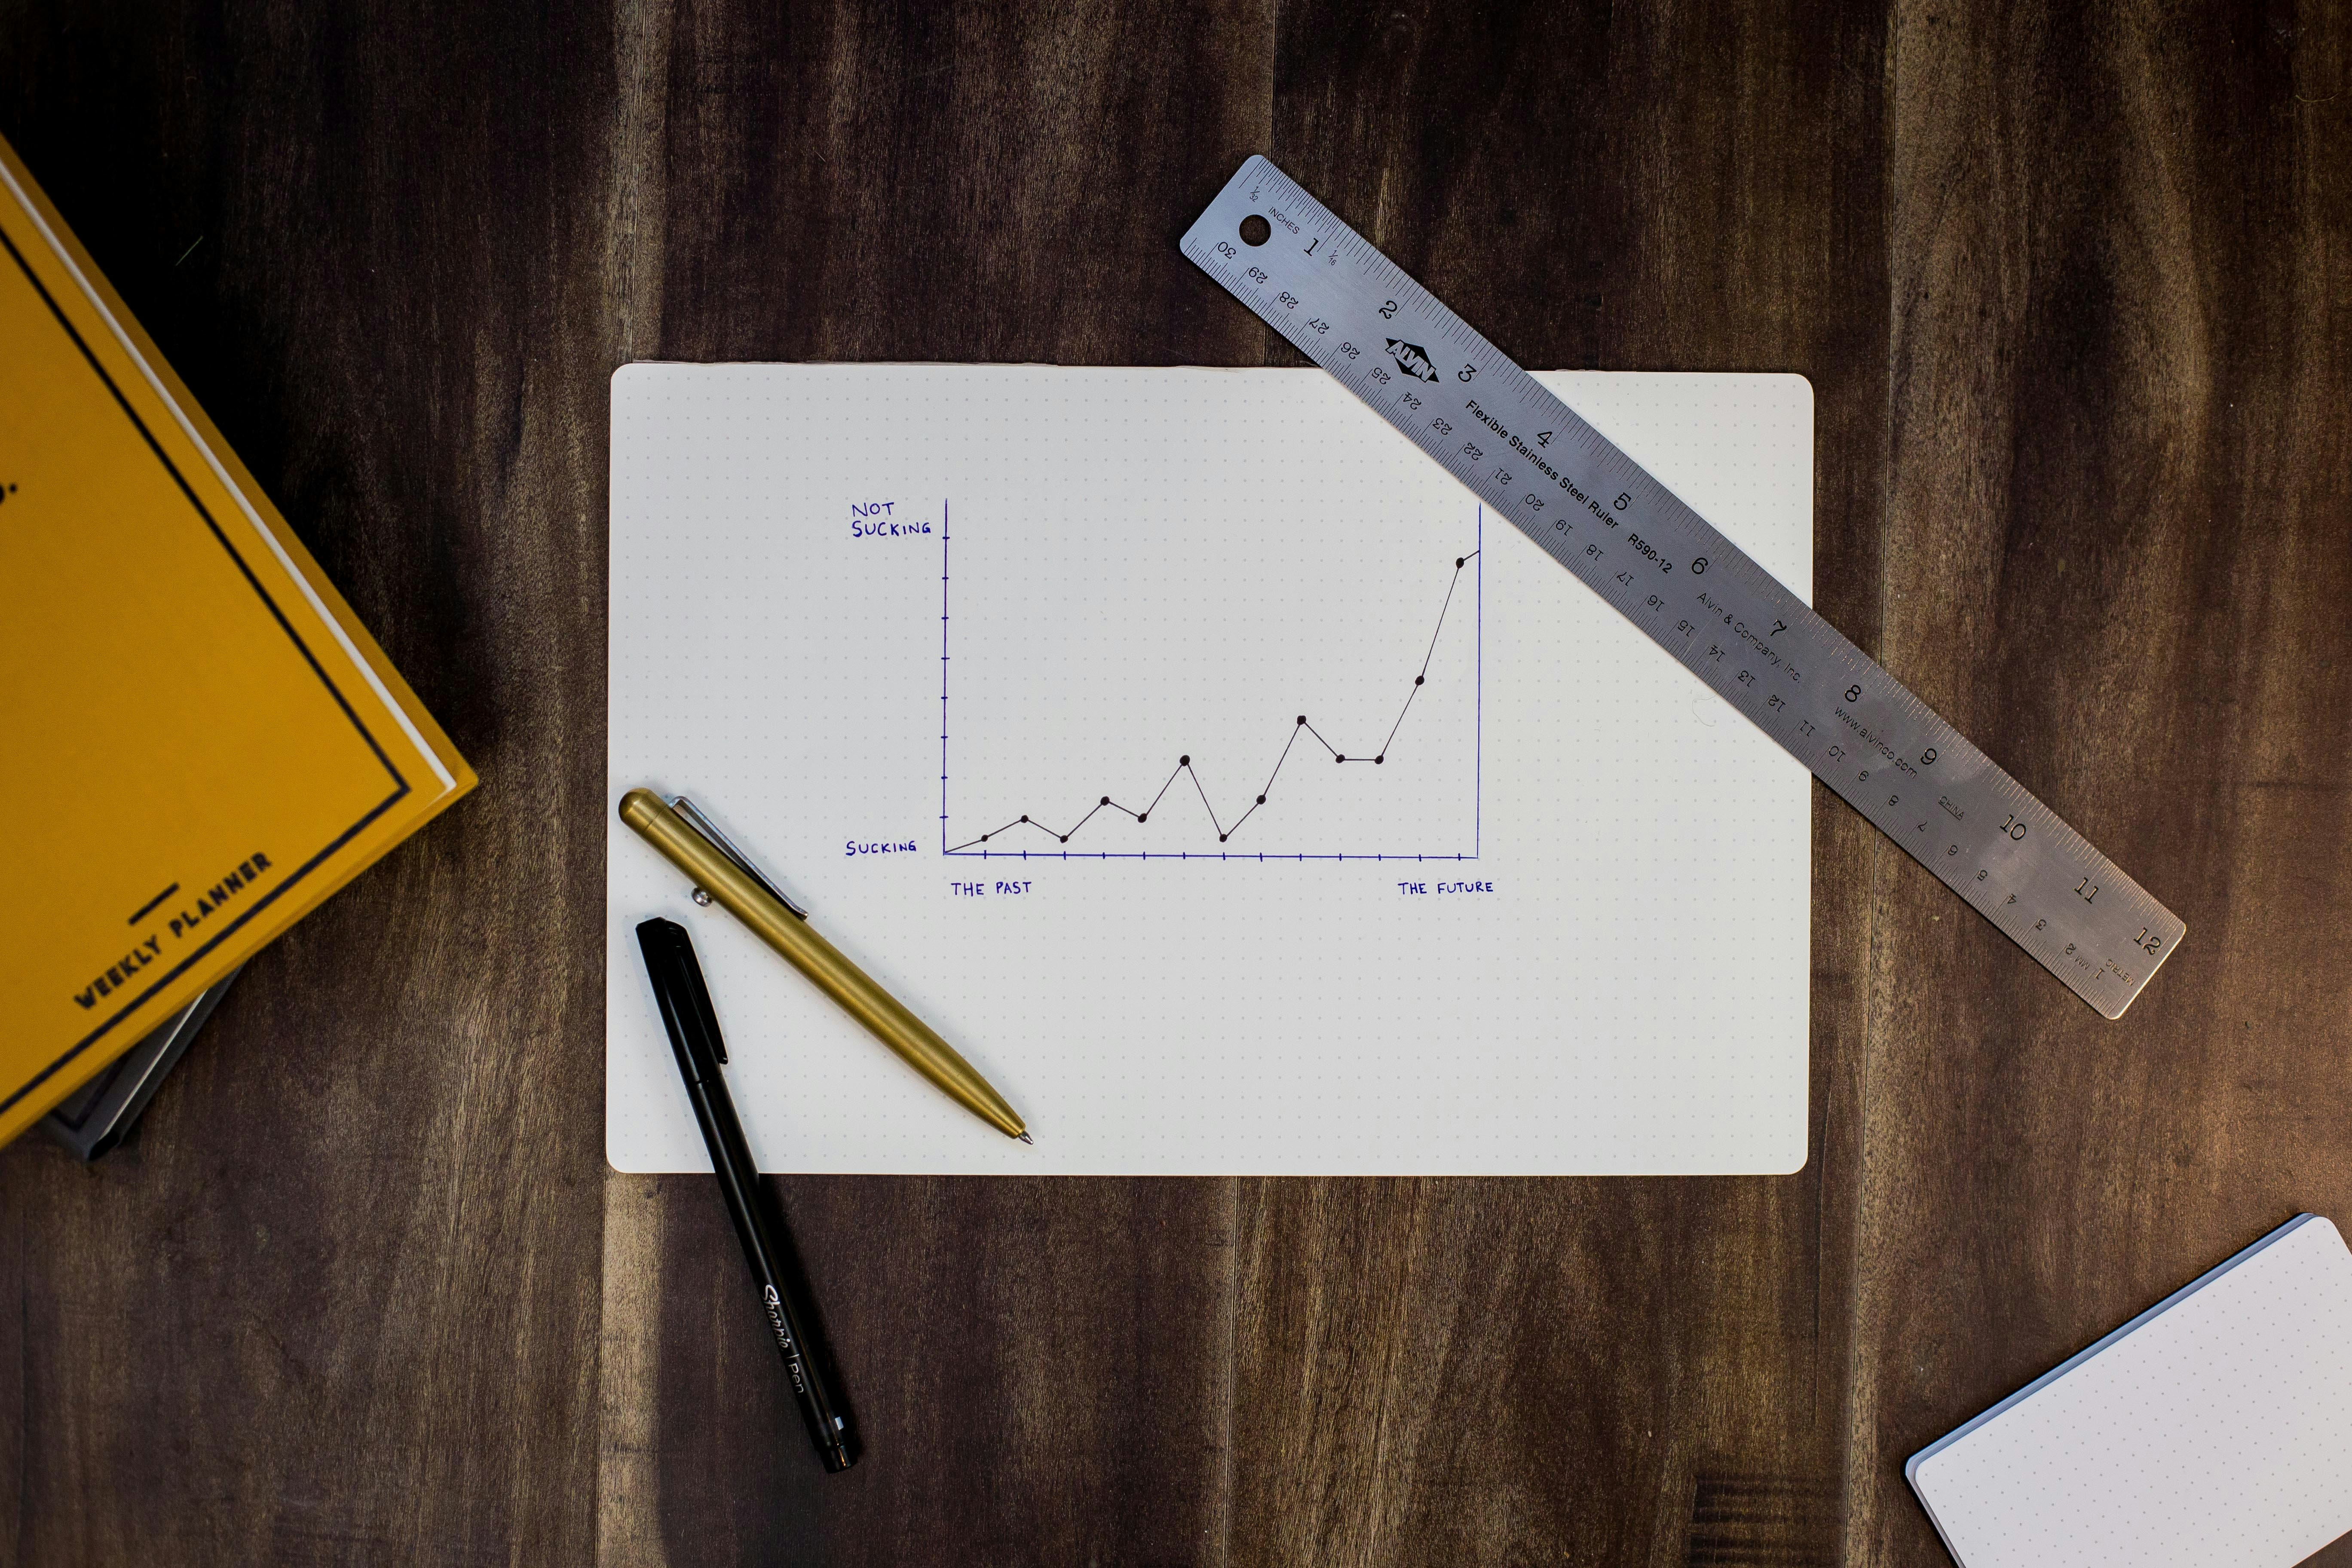 Pens and ruler on top of a paper showing a line graph